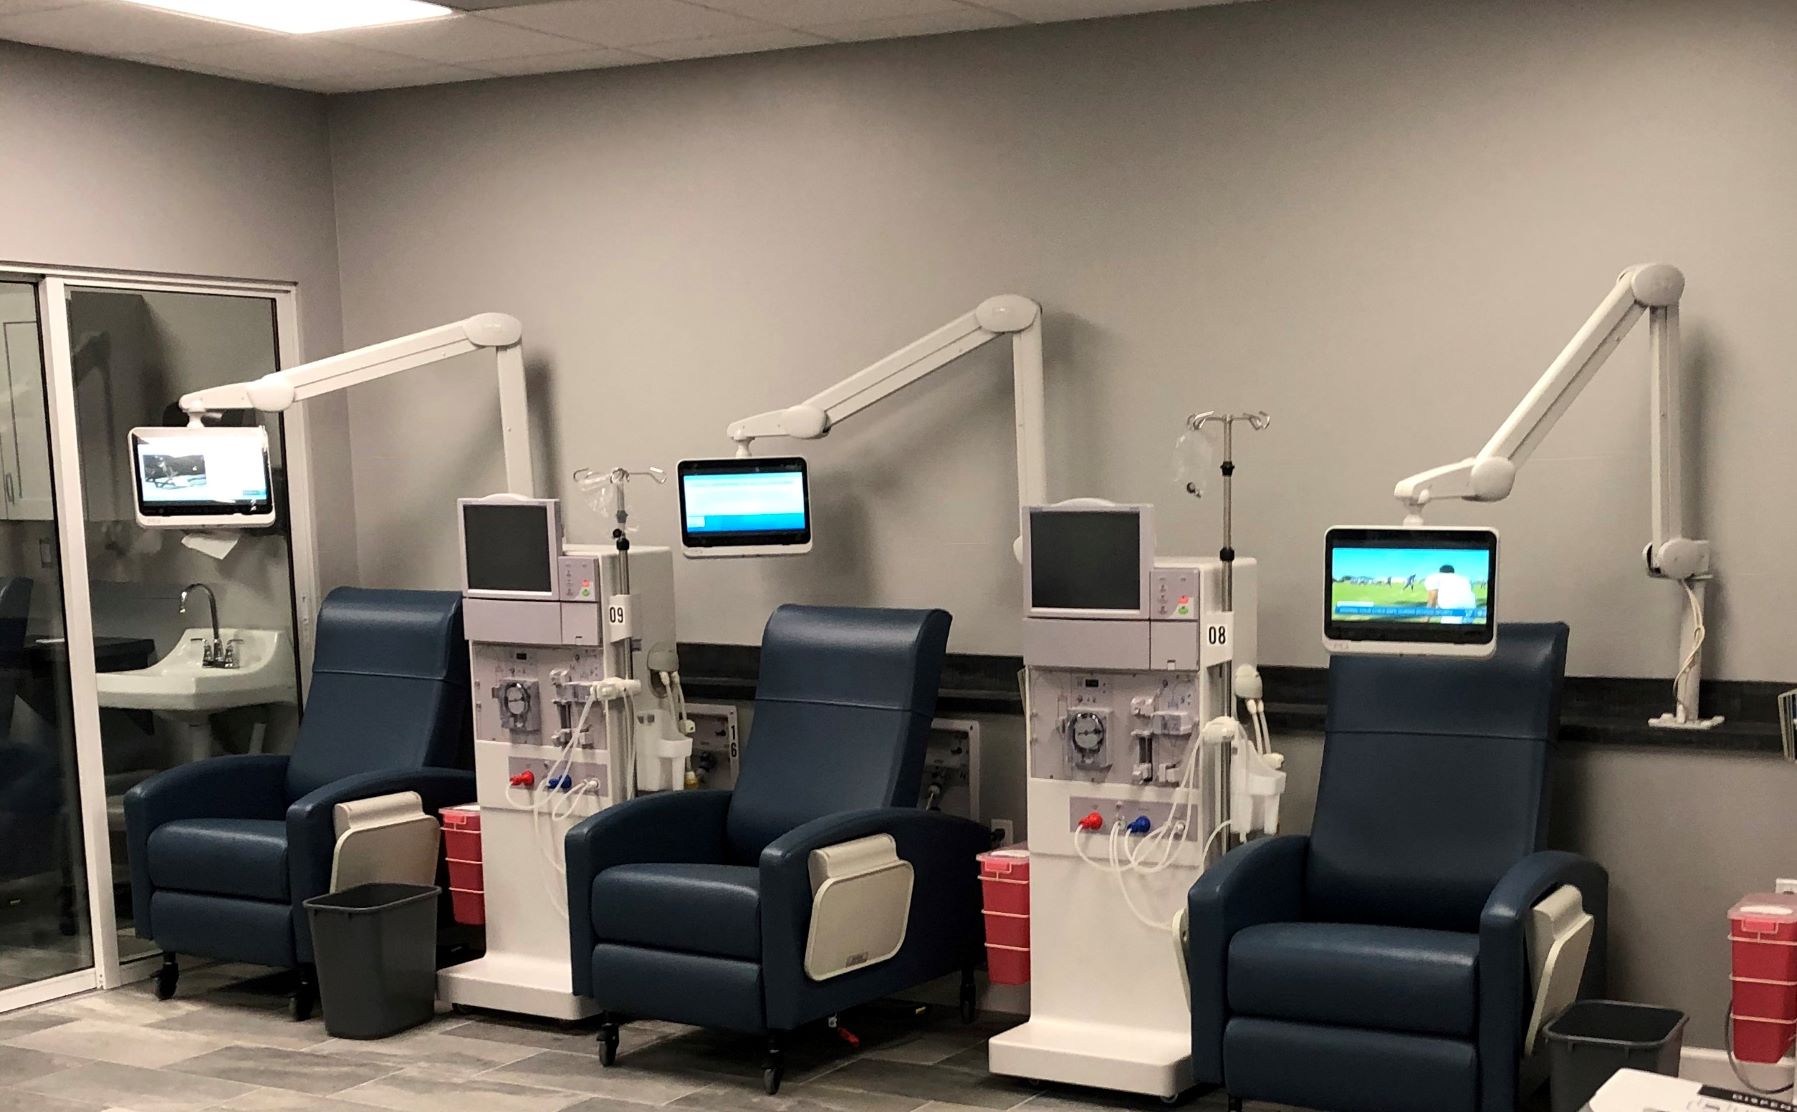 Three medTAB16s by  PDi Communication Systems, Inc, displayed on mounting arms chairside at a dialysis clinic